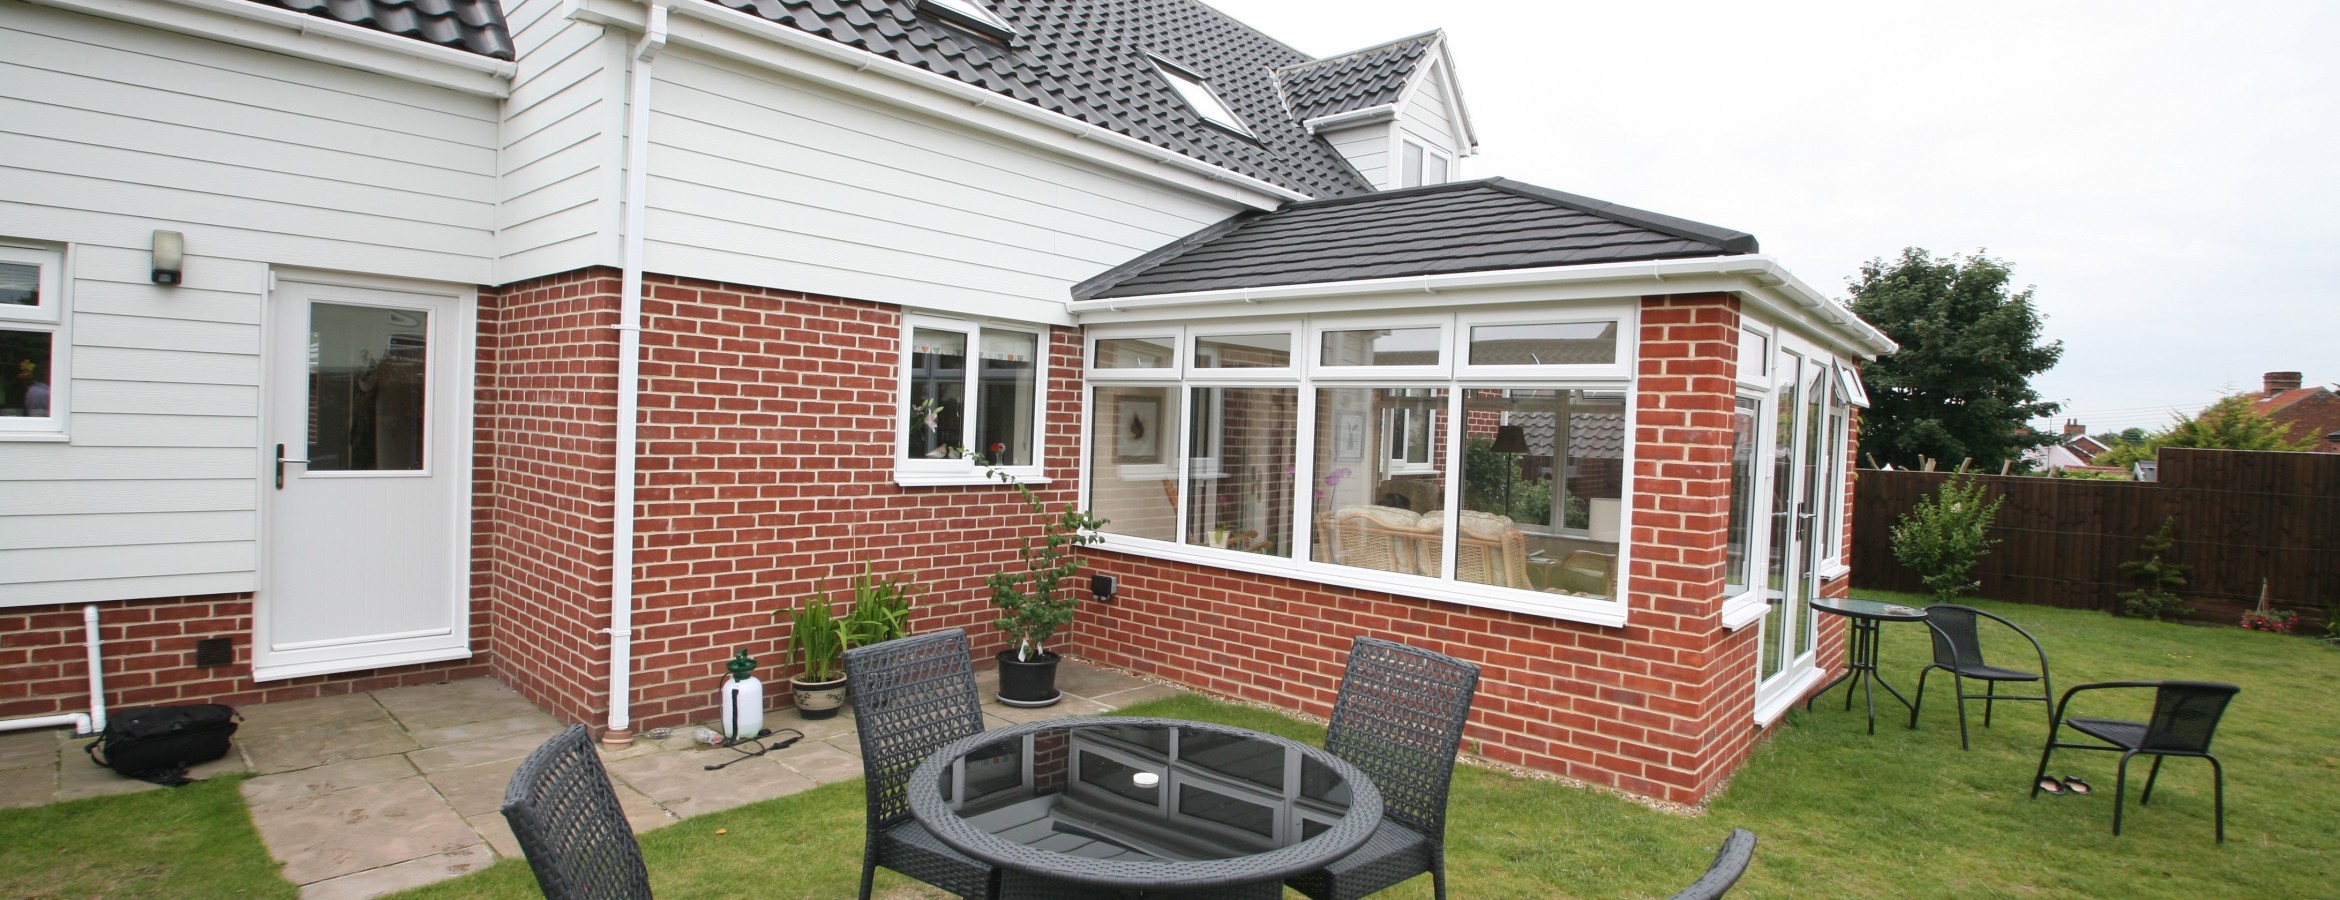 Conservatory with an insulated roof